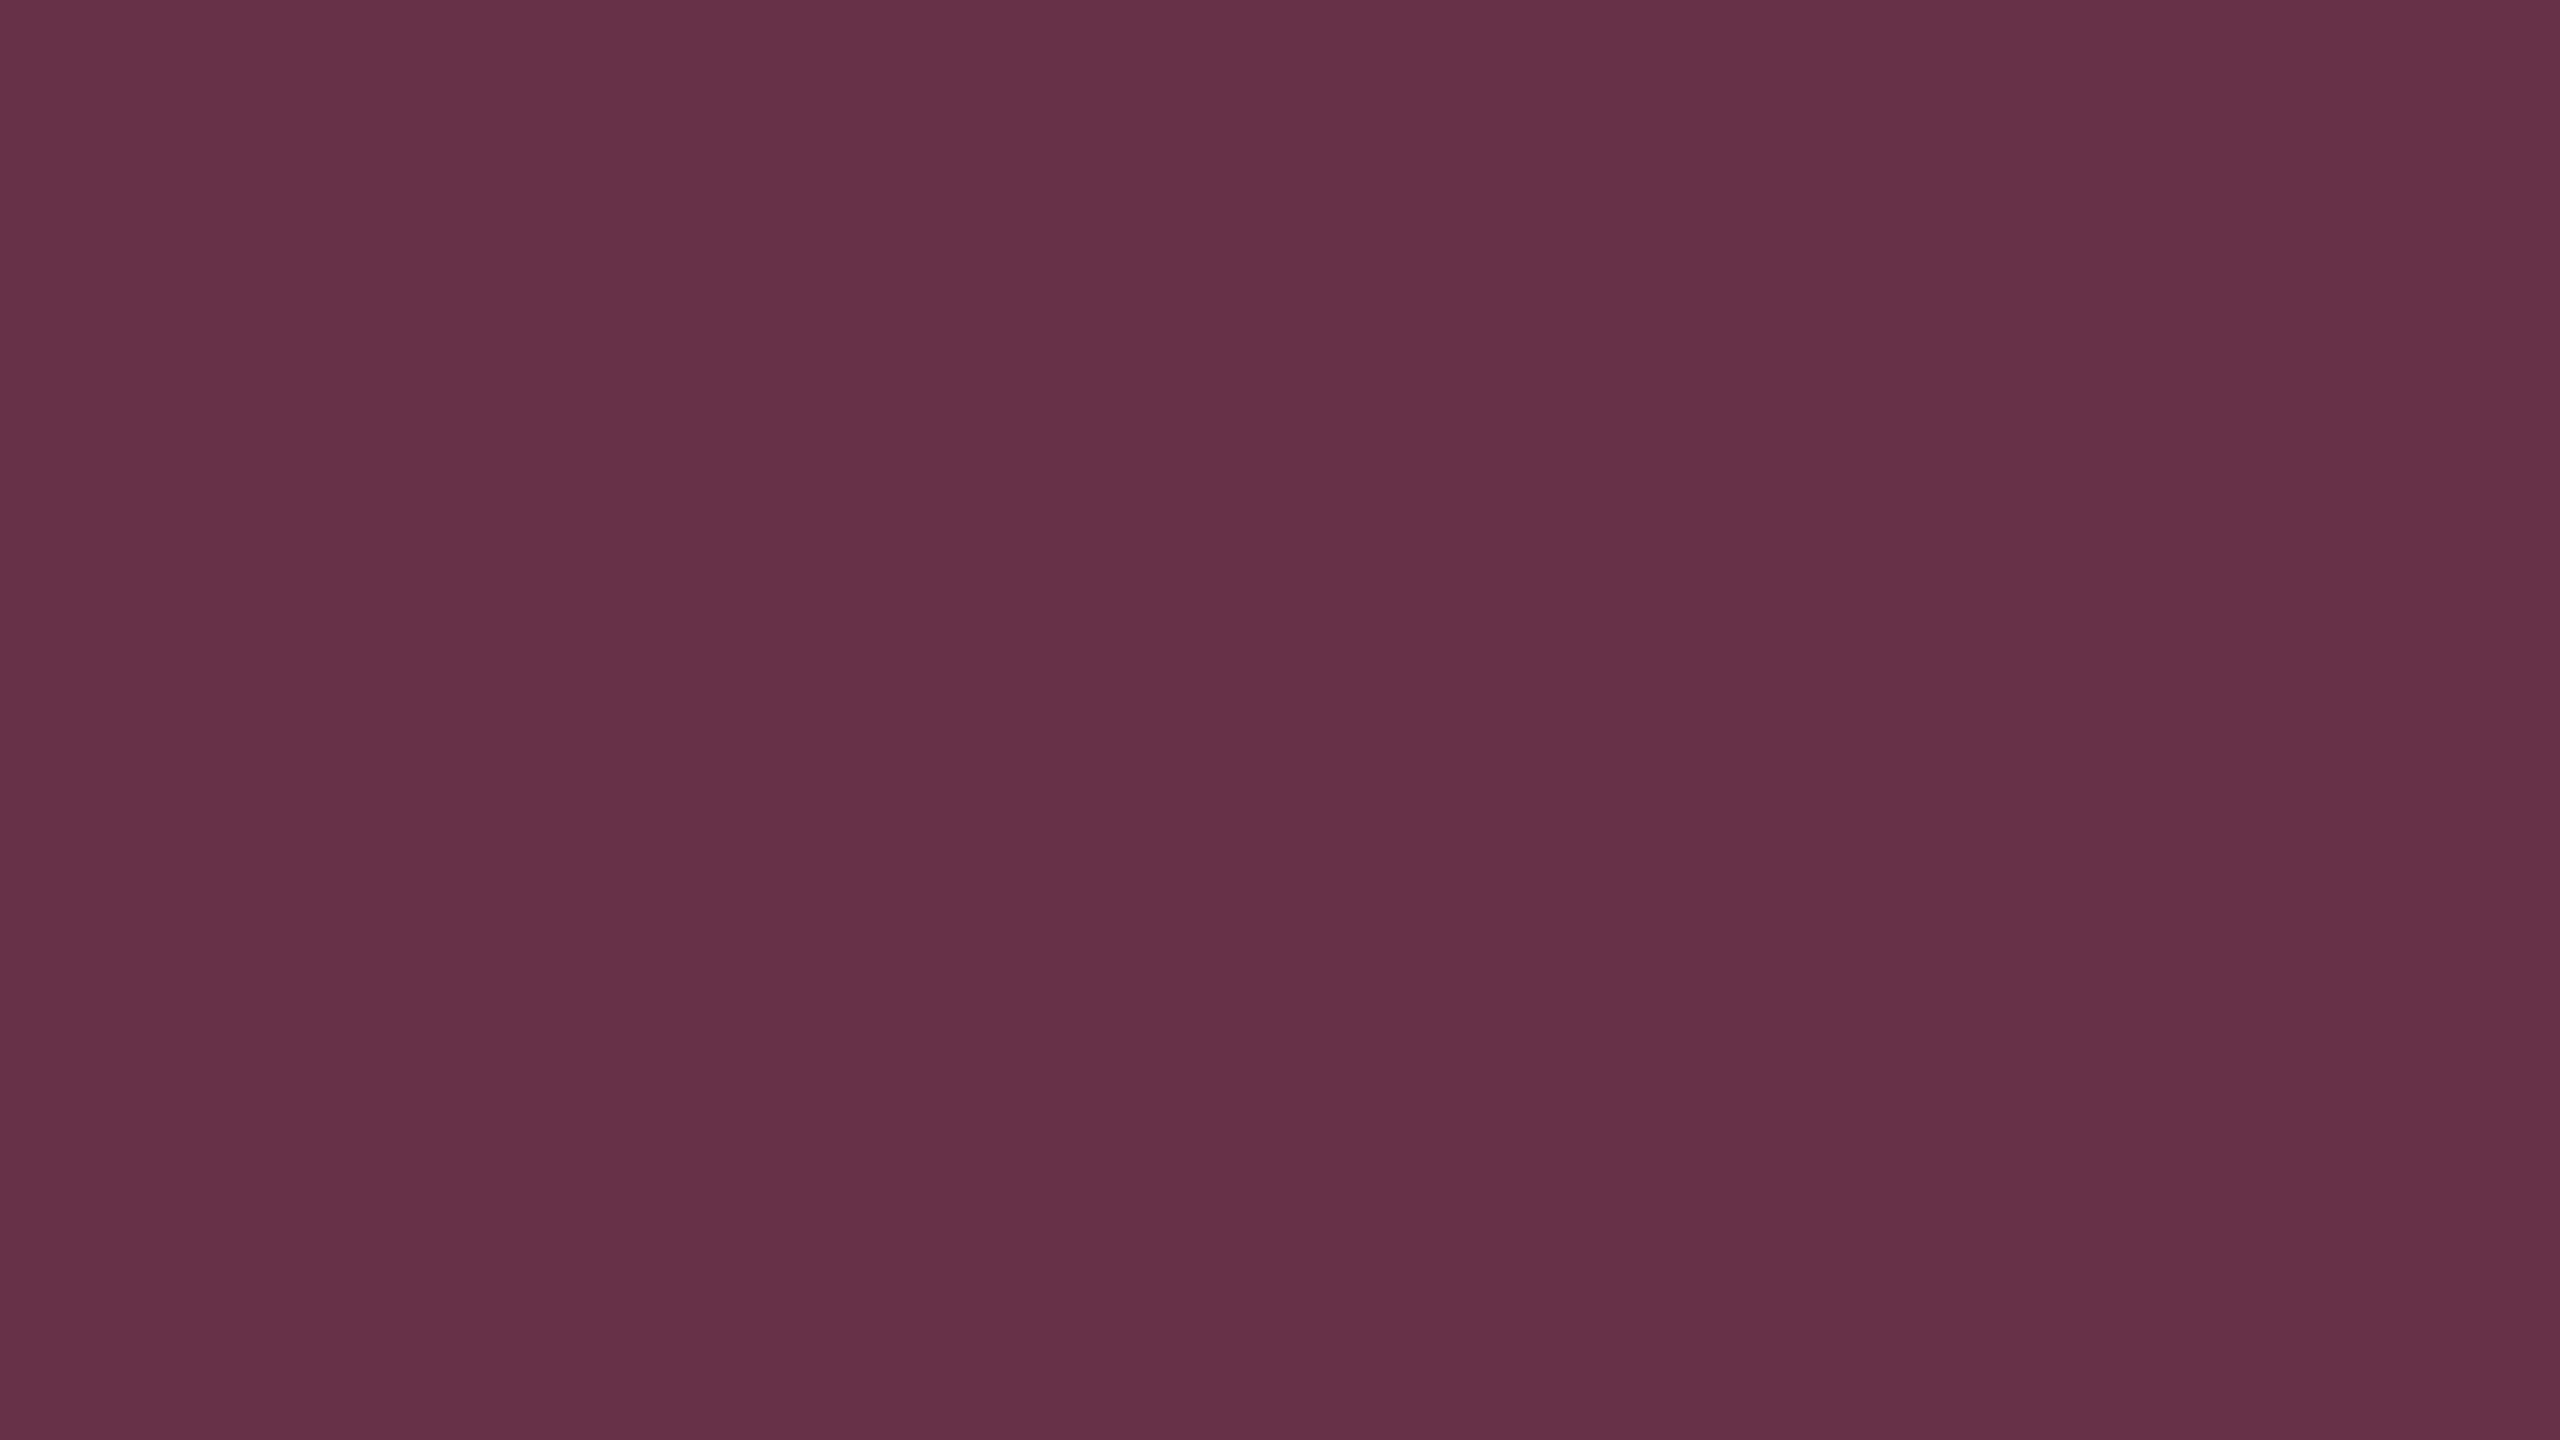 2560x1440 Old Mauve Solid Color Background